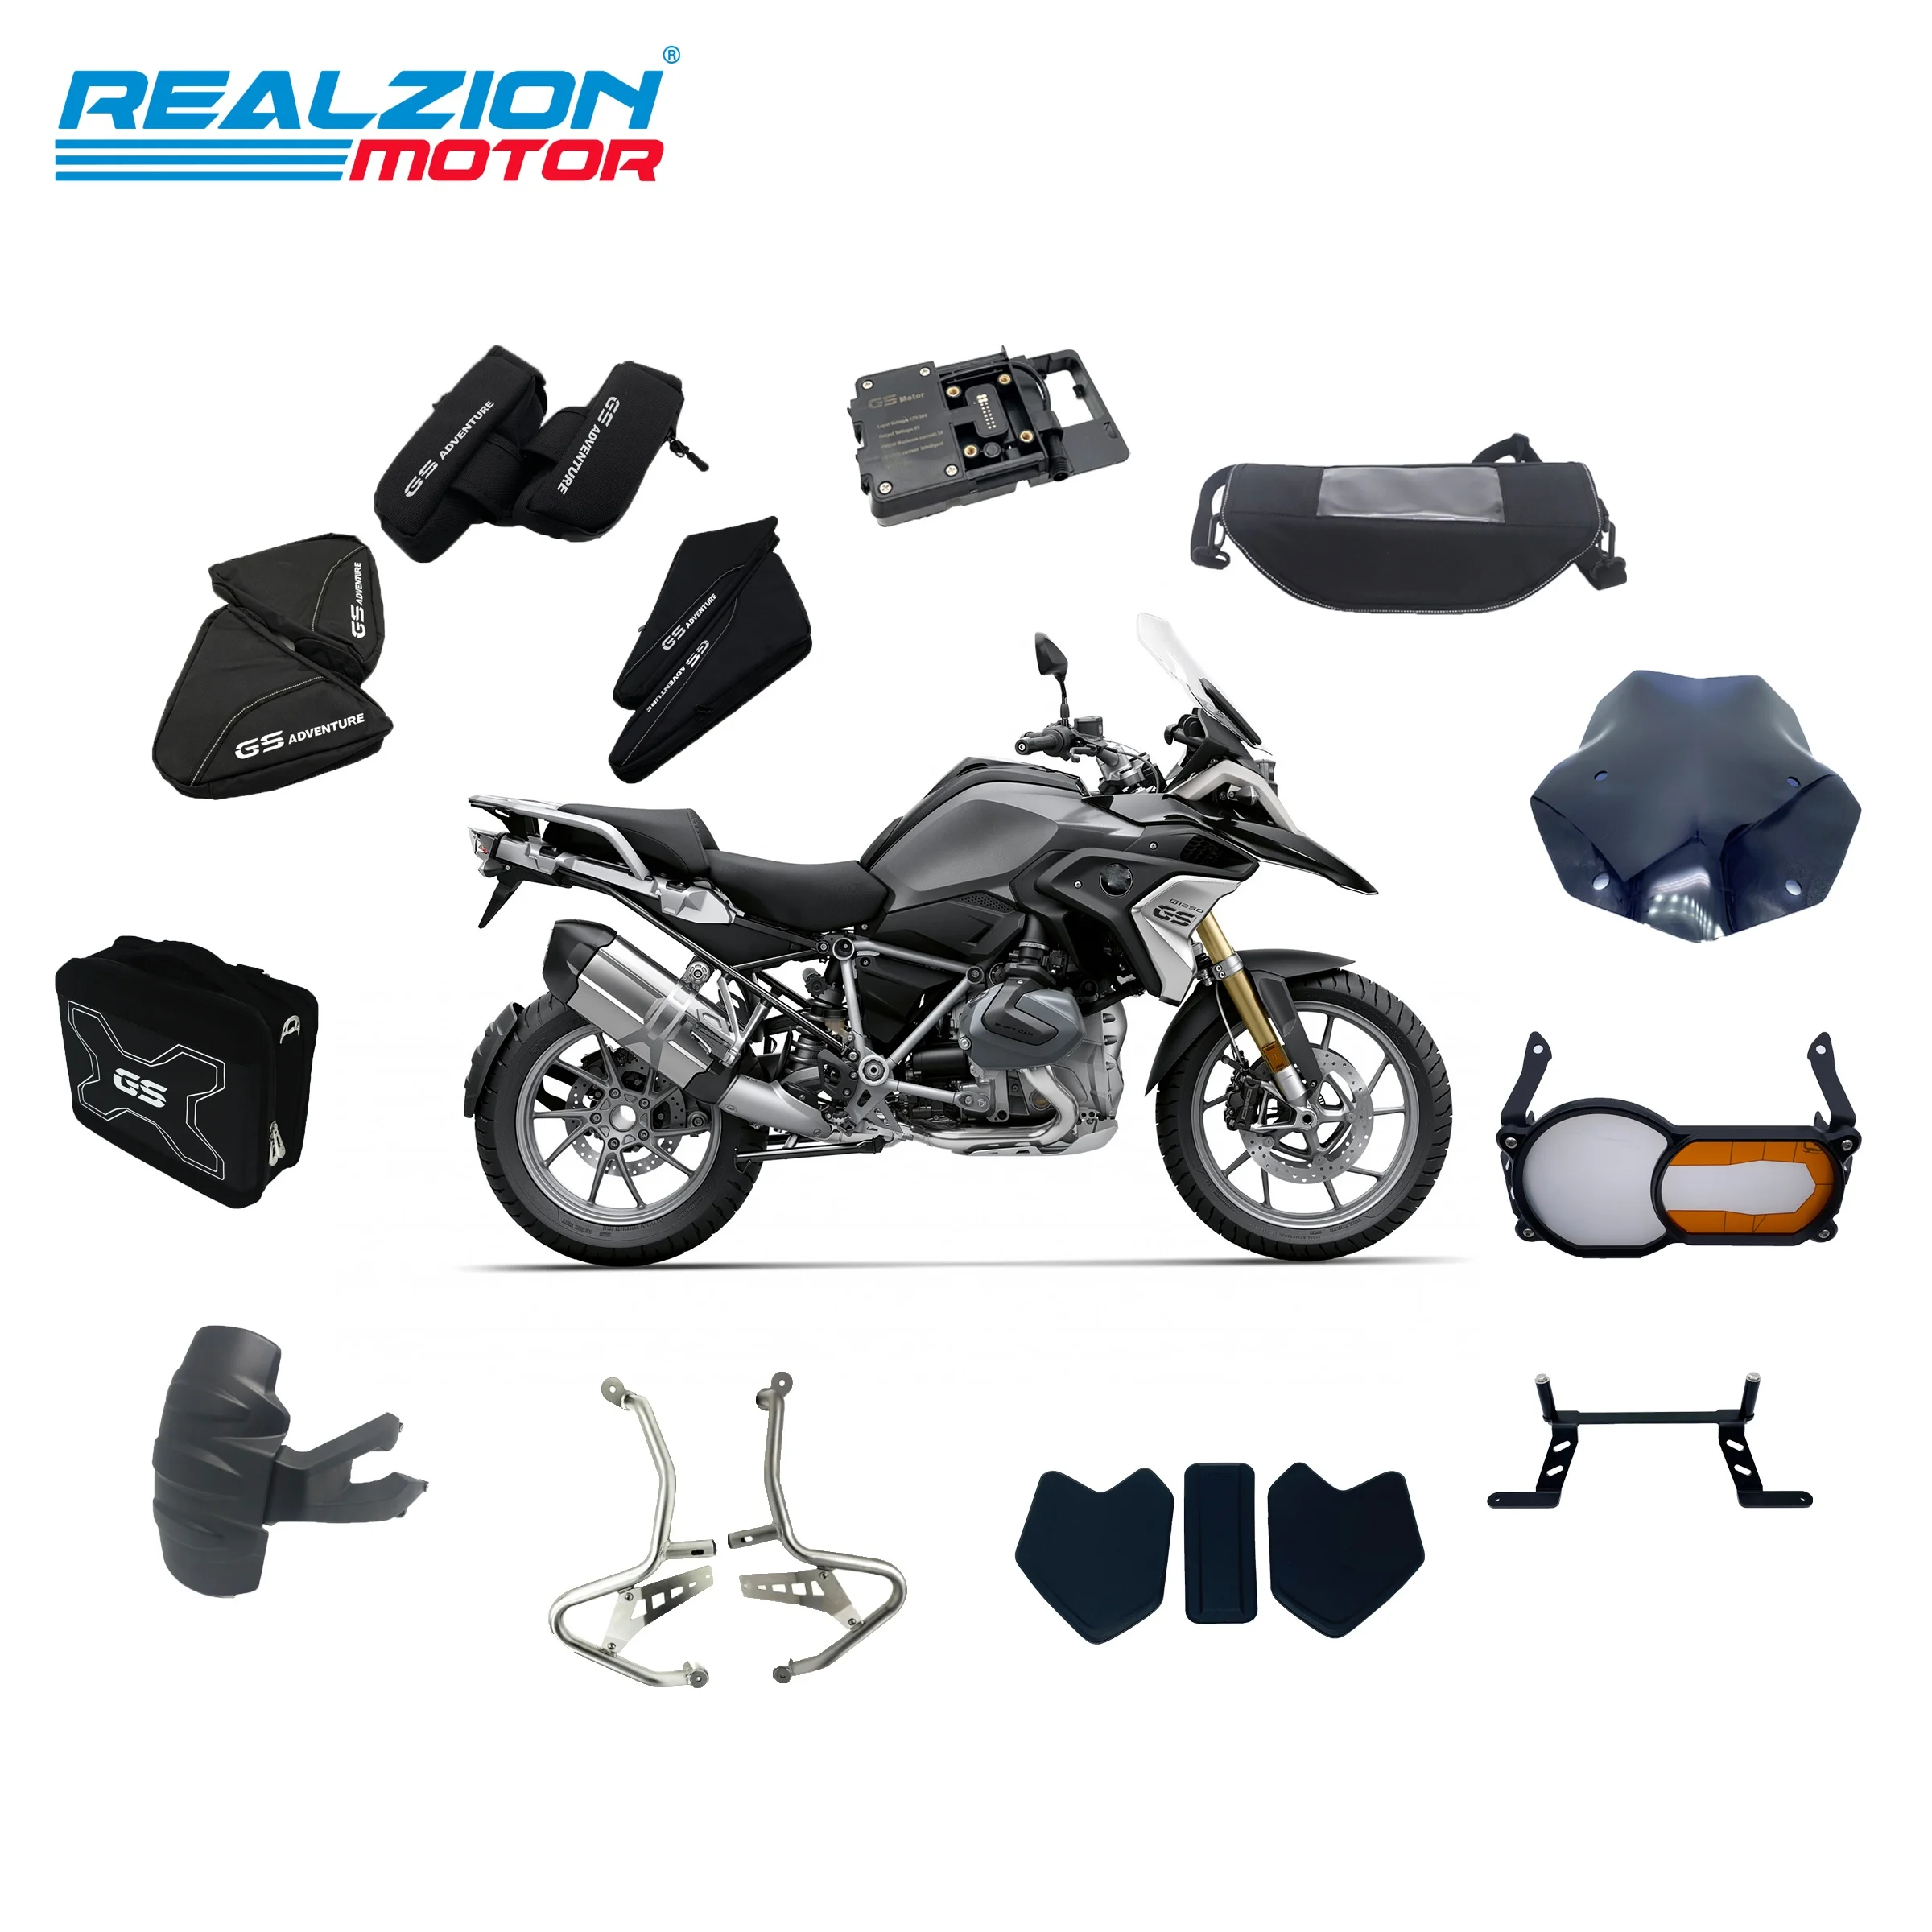 Wholesale REALZION Motorcycle Parts Wholesale Modification Accessories For BMW R1200GS R1250RS LC From m.alibaba.com